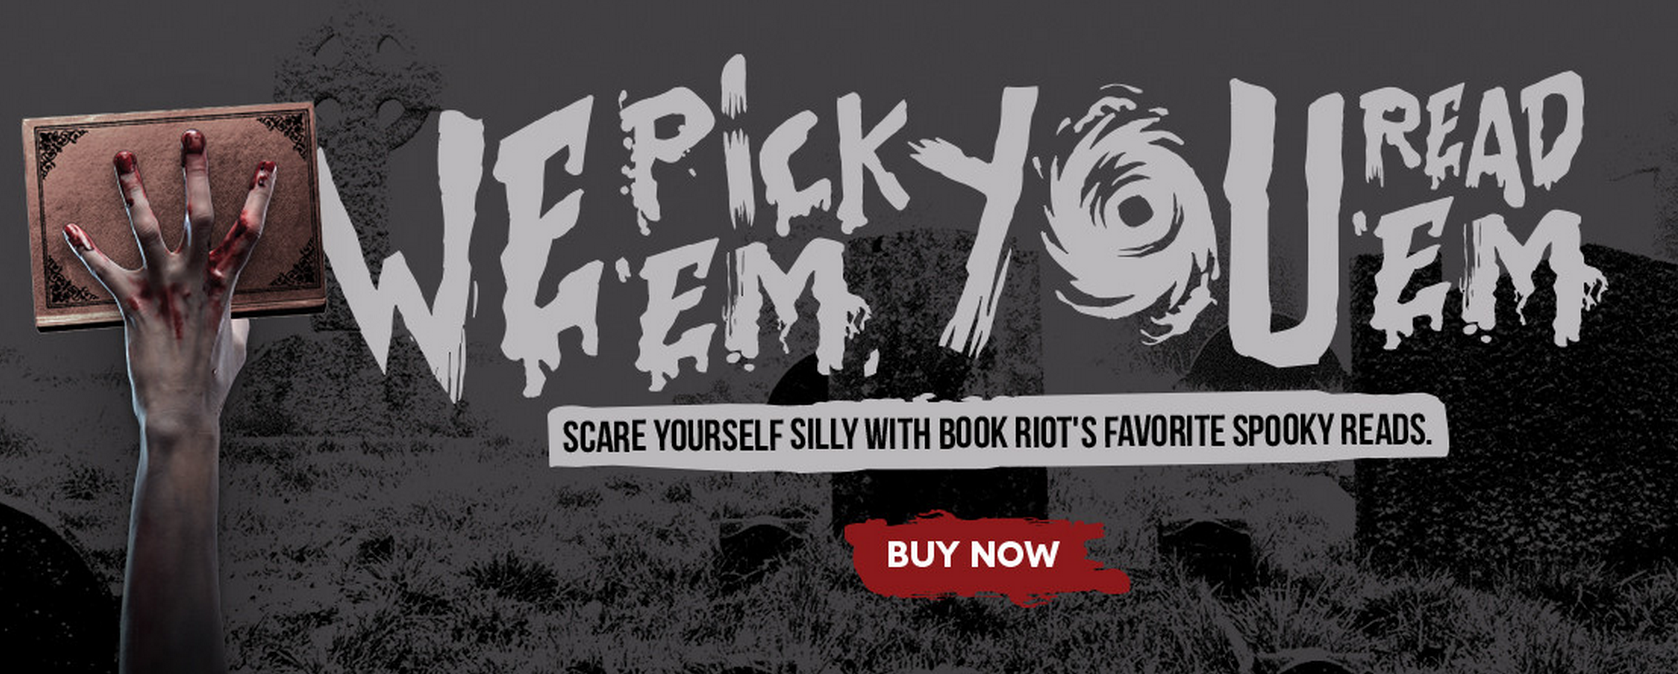 Book Riot Limited Edition Horror Box Available Now!